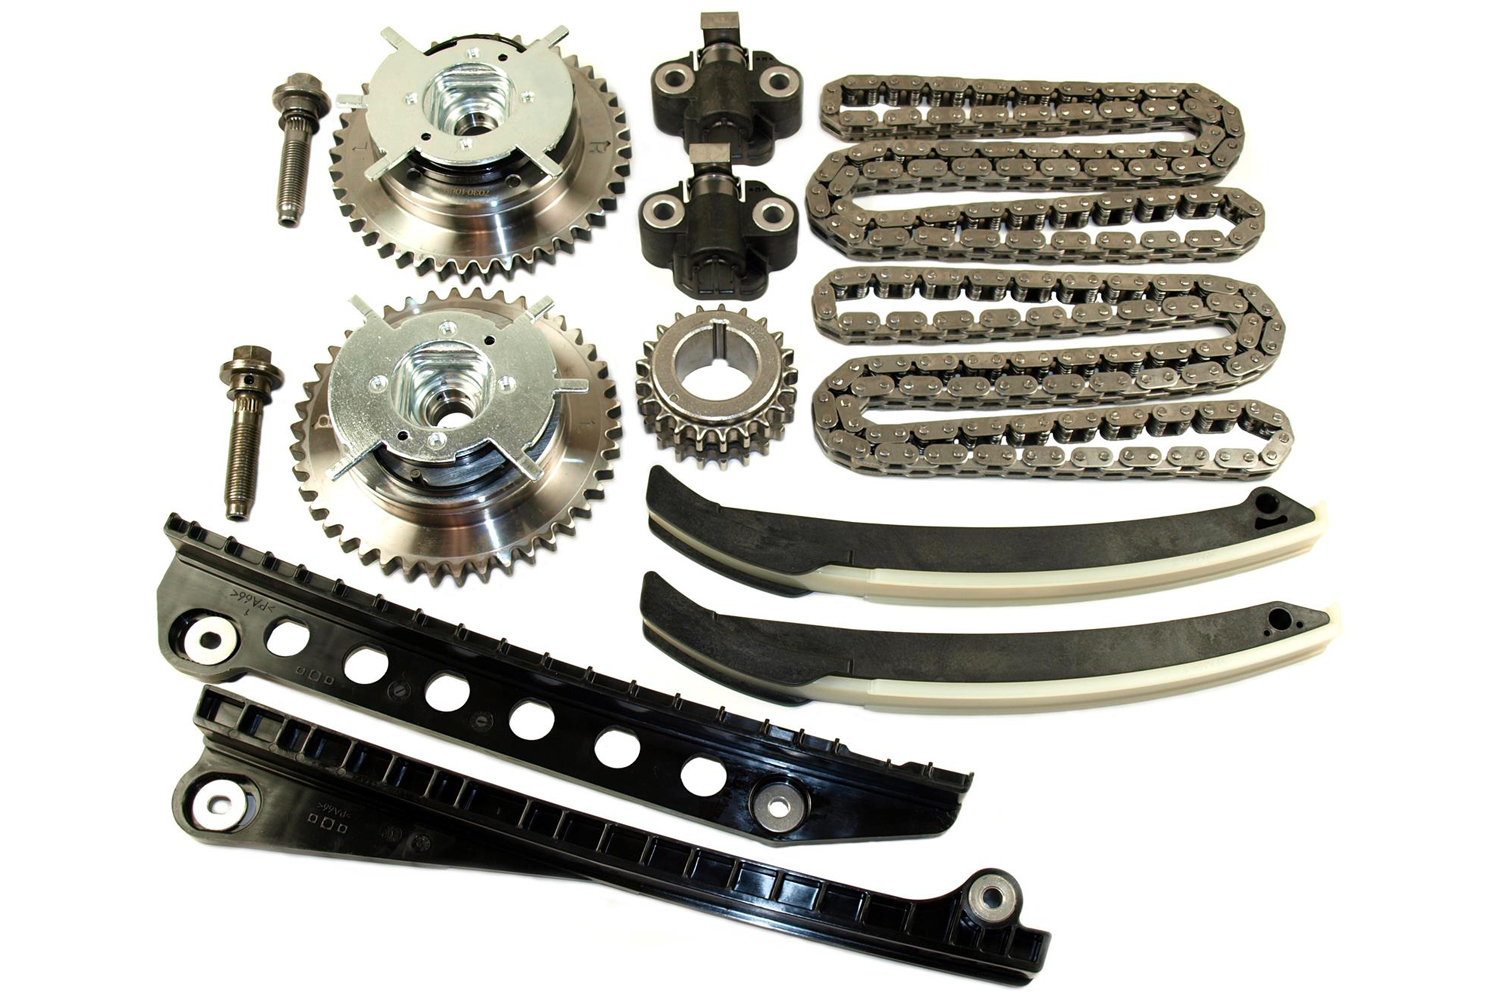 Cloyes 9-0391SBVVT Timing Chain Set, Single Roller, Guides / Tensioners / Tensioner Arms / Steel Gears, Ford Modular 2004-14, Kit